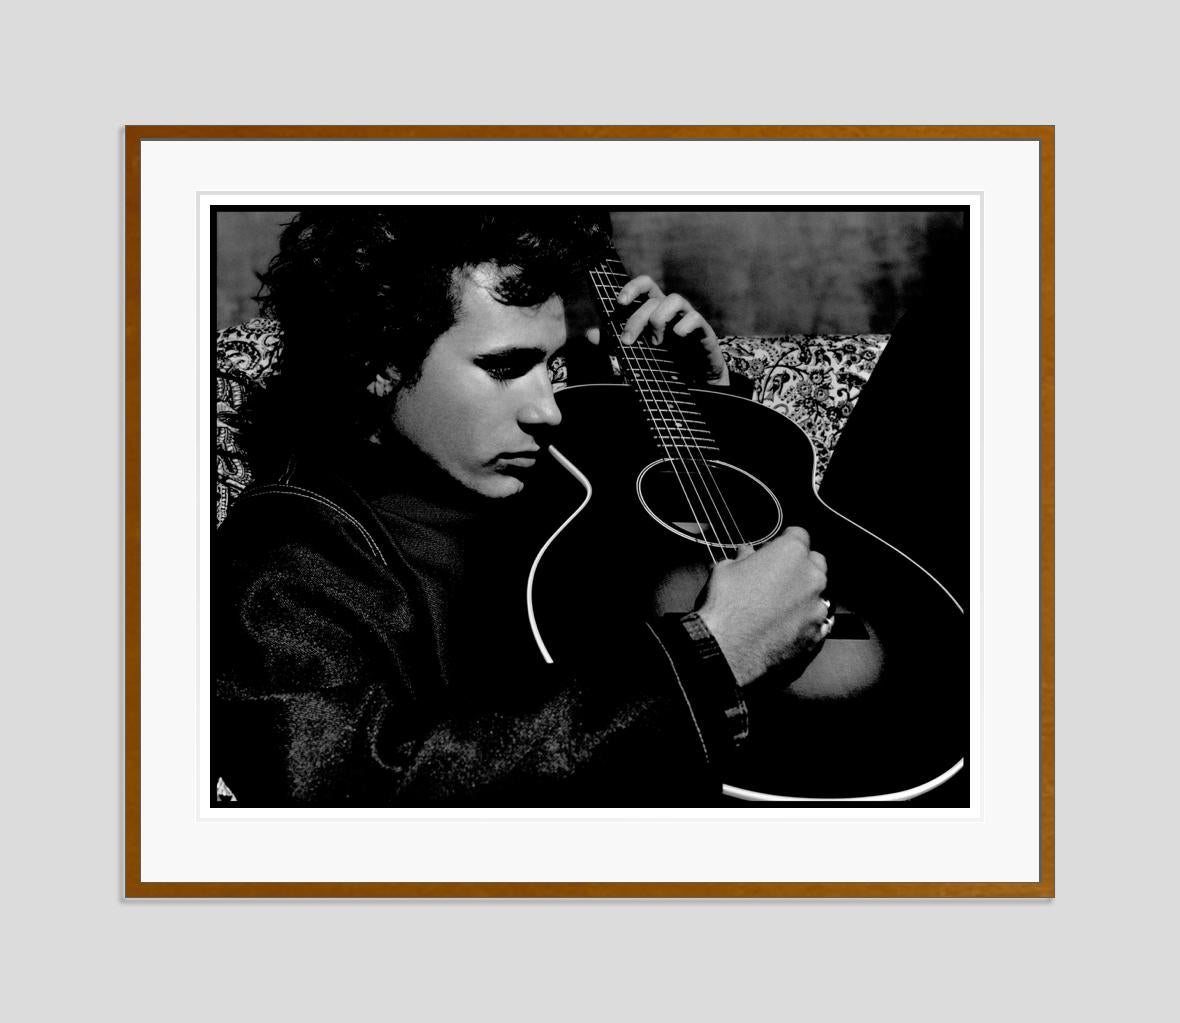 Jeff Buckley

1994

Jarvis Cocker, Pulp photographed by Kevin Westenberg for NME Magazine in Paris in July 1996.

by Kevin Westenberg
Signed Limited Edition

Kevin Westenberg is famed for his creation of provocative and electrifying images of